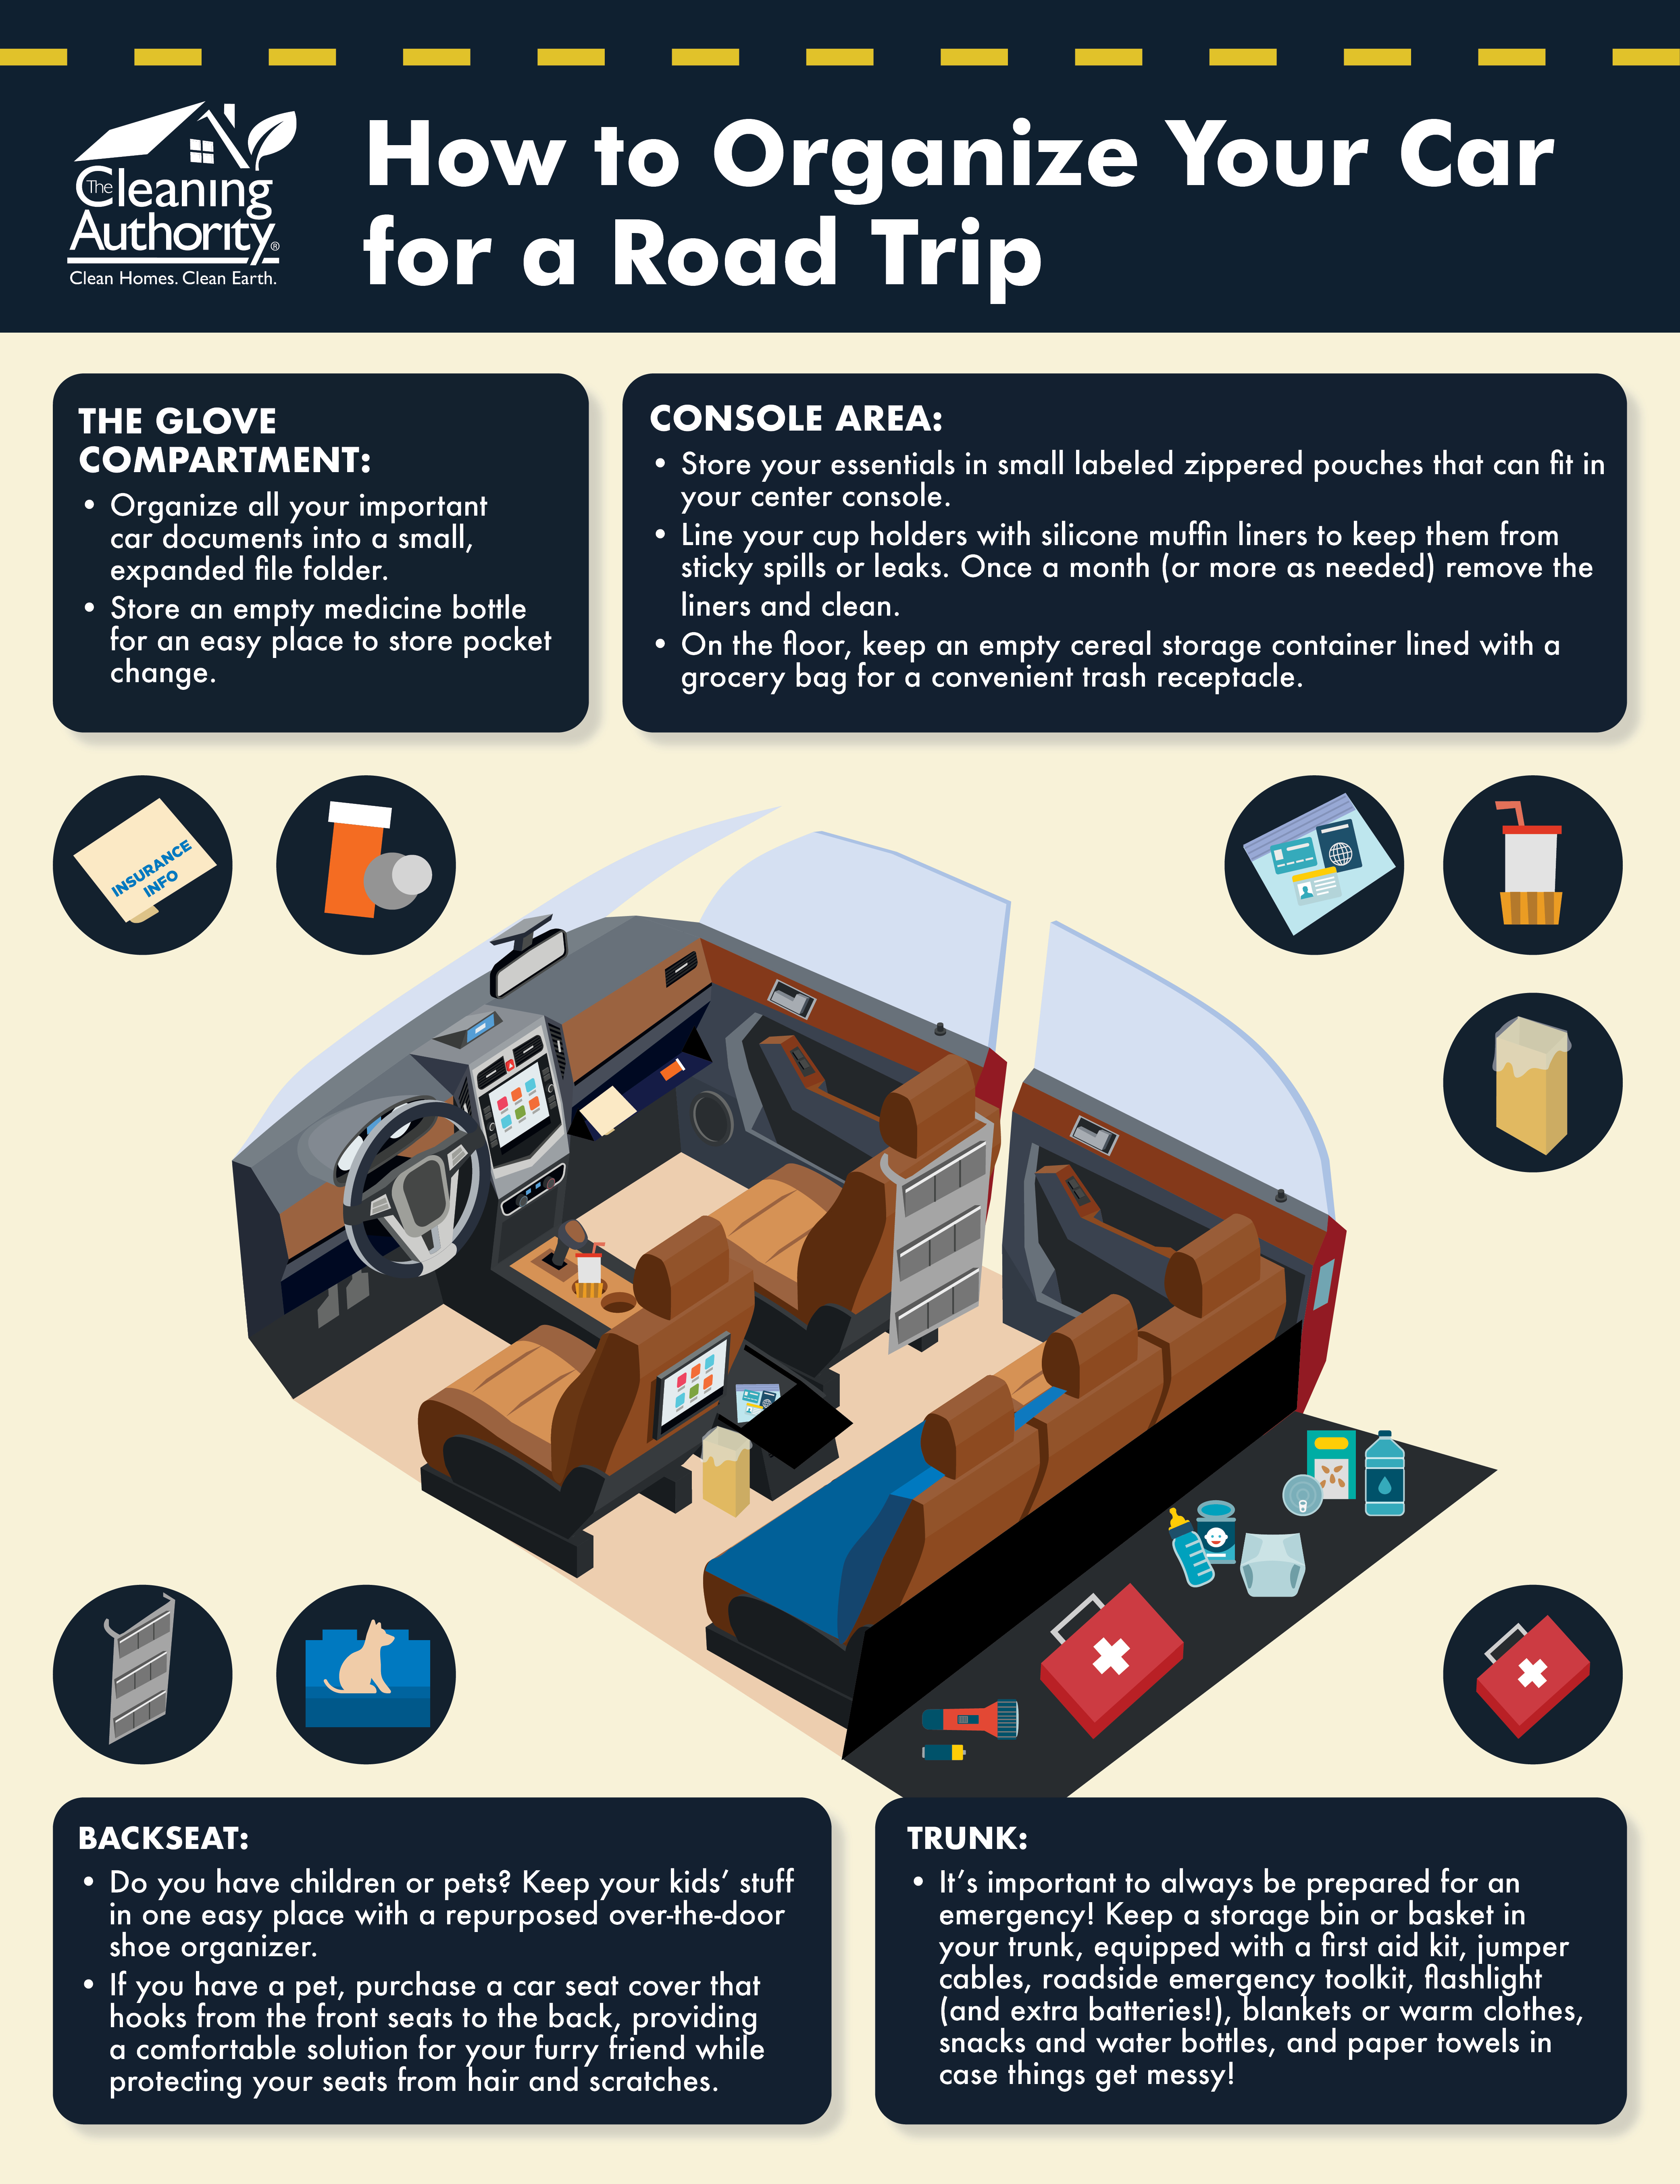 Infographic with tips to organize different parts of your car before a road trip.